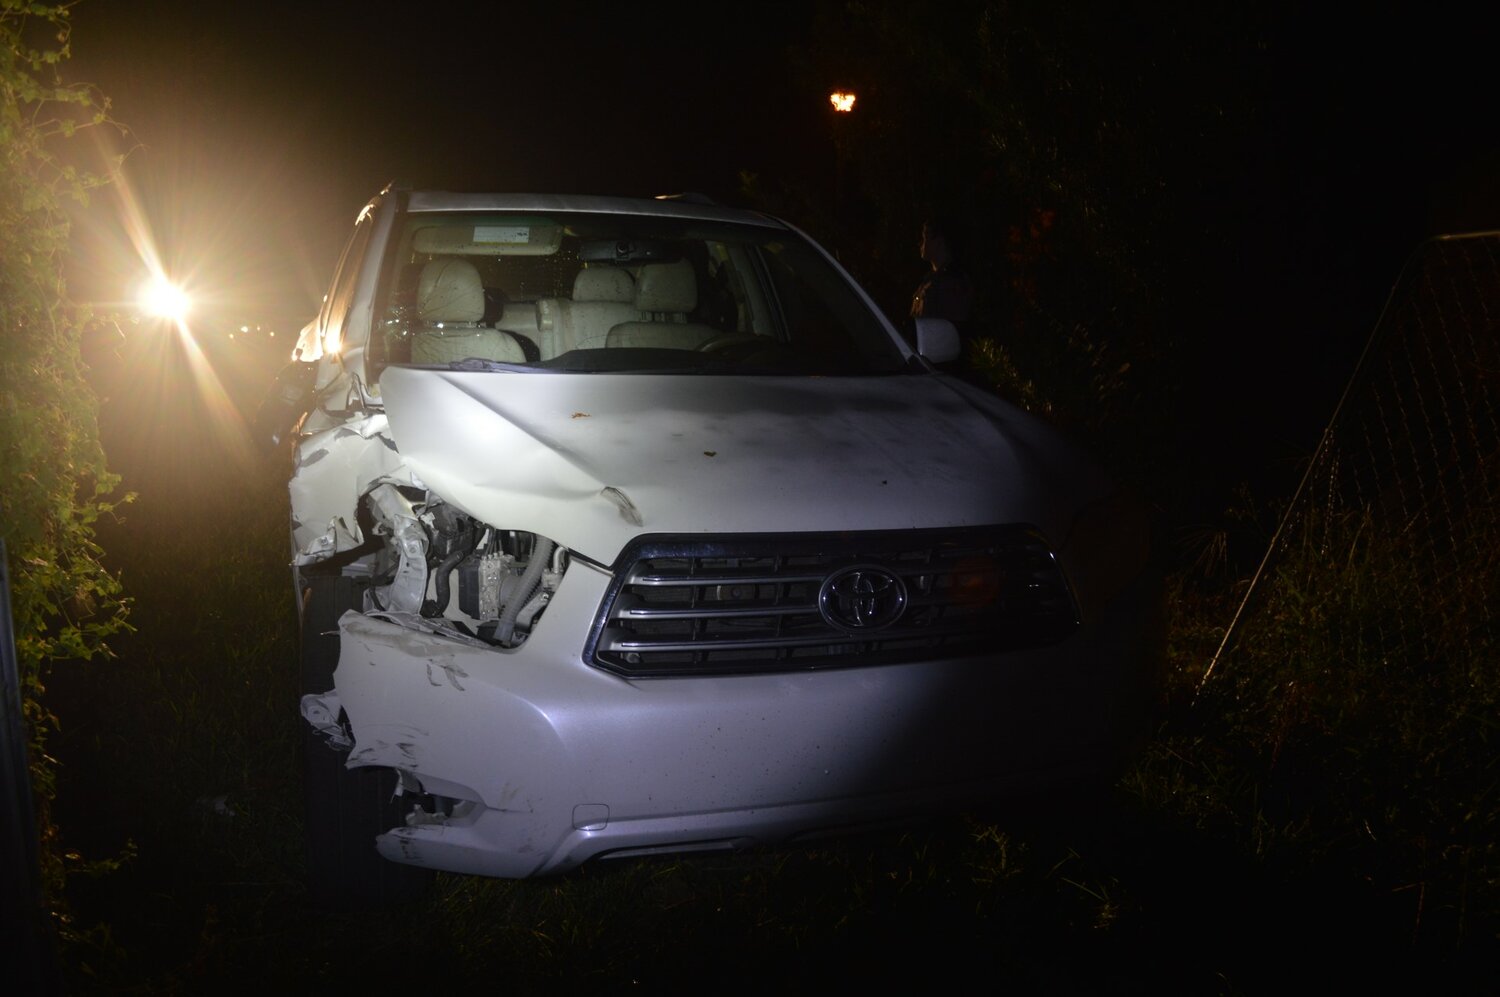 The Florida Highway Patrol has located and impounded an SUV suspected to be involved in the hit and run accident that took the life of a 15-year-old bicyclst.. Anyone with information  regarding this hit and run crash is asked to contact the Florida Highway Patrol or Crimestoppers.